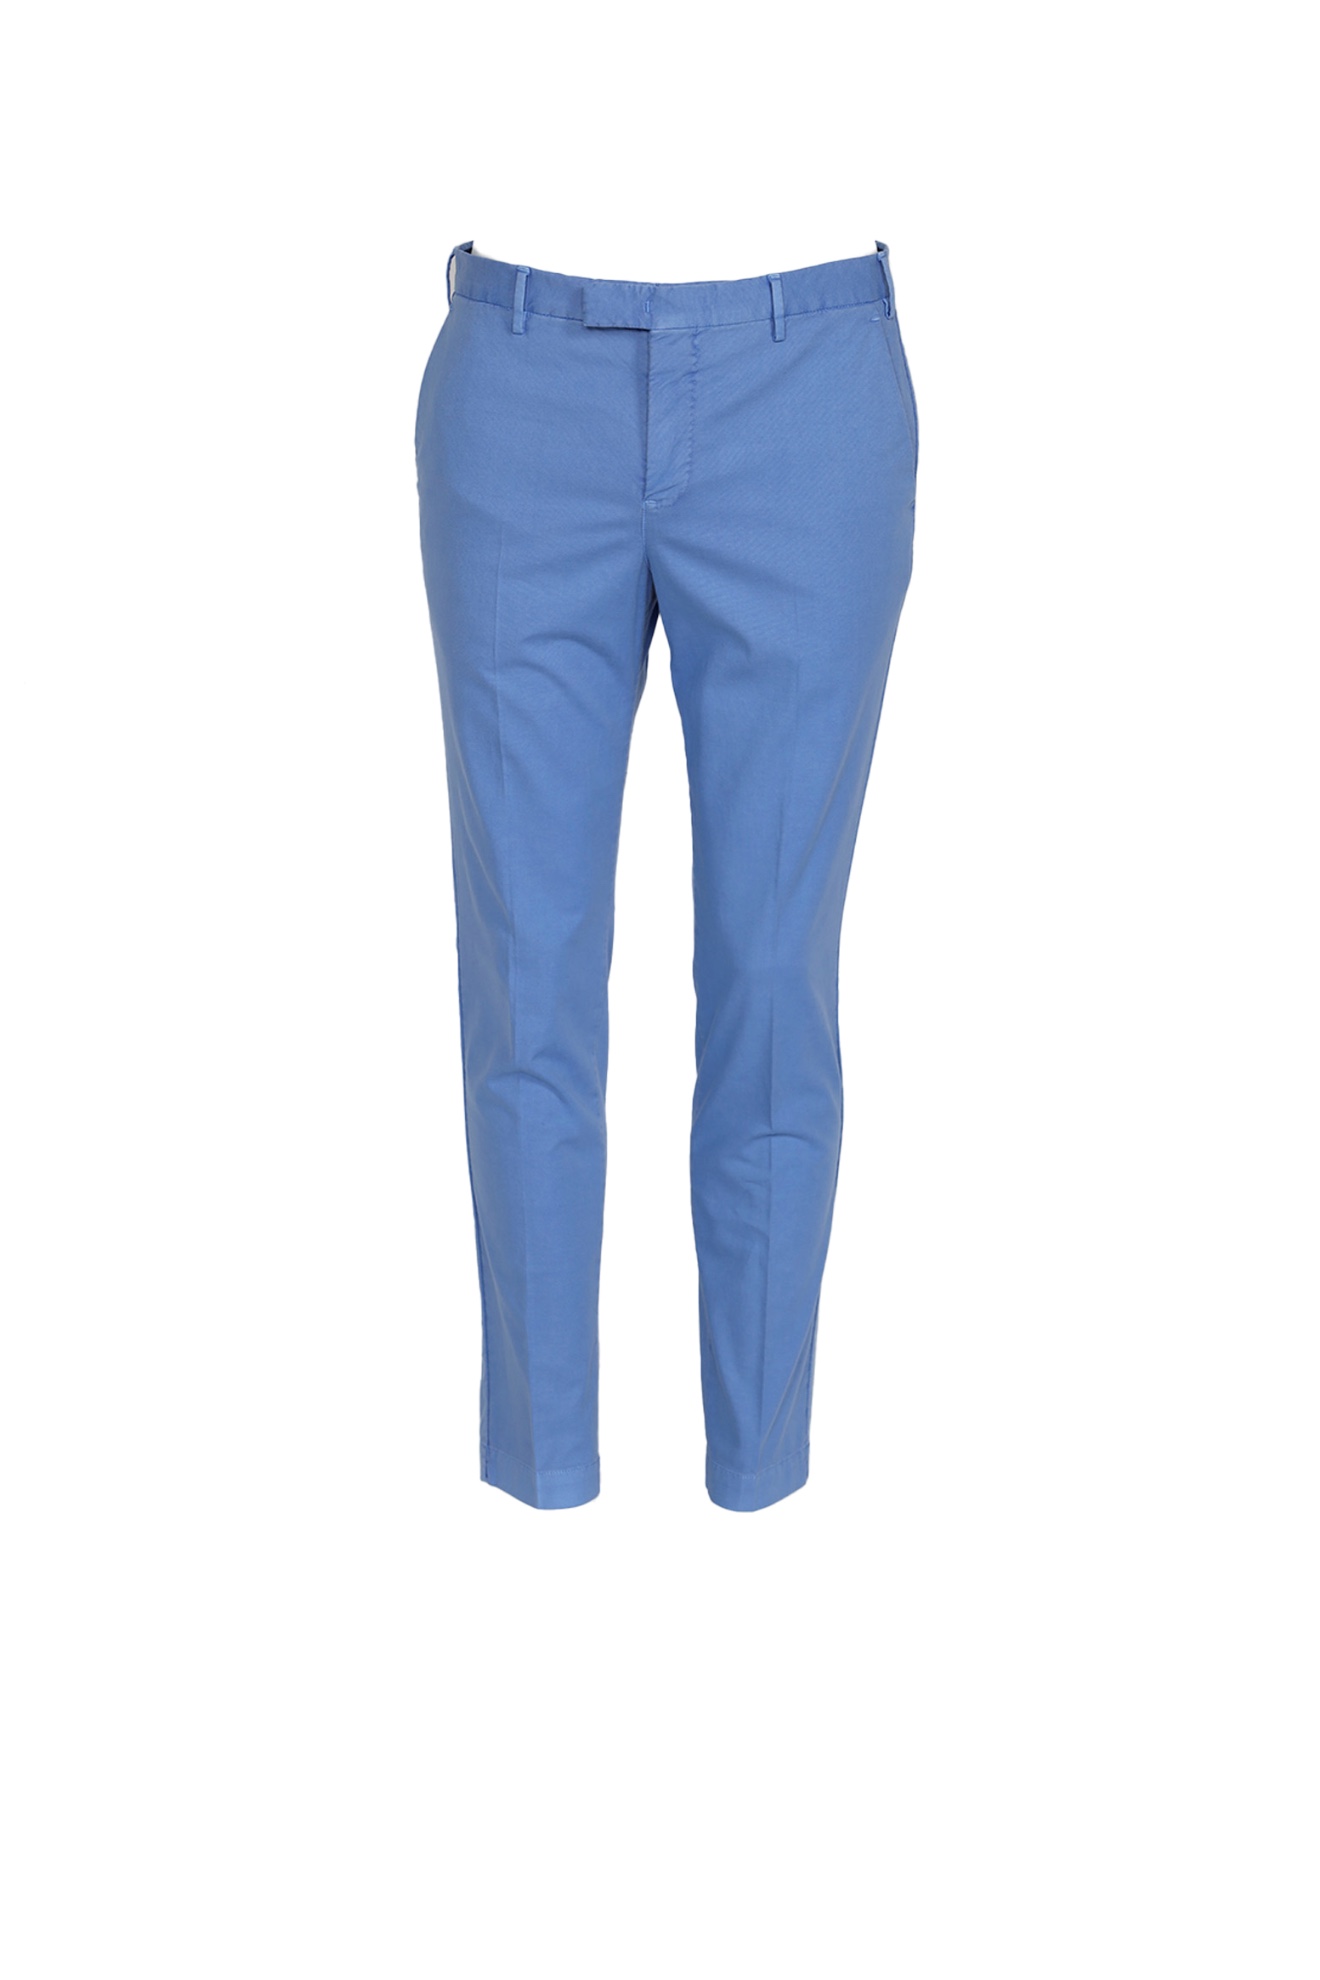 PT Torino Cotton chino style trousers with crease blue 48